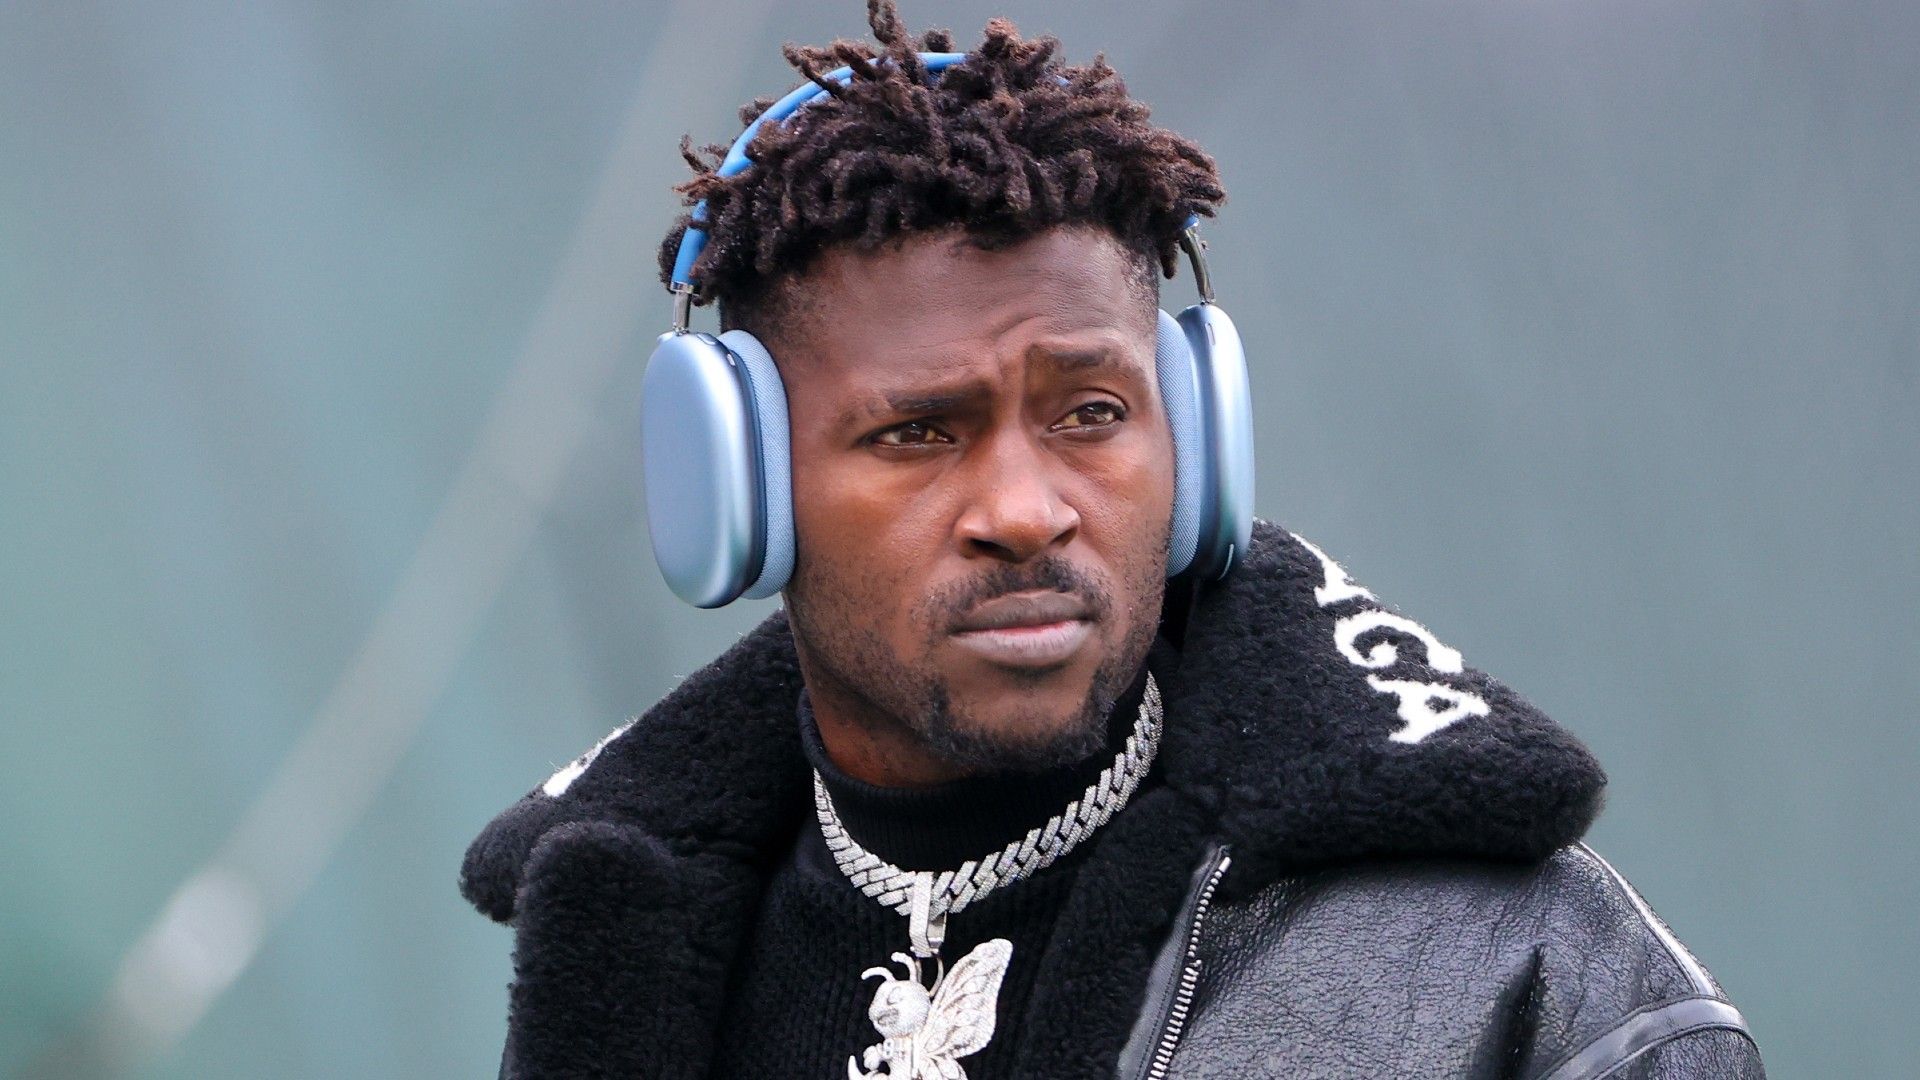 New twist revealed in NFL star Antonio Brown's explosive sudden Tampa Bay exit